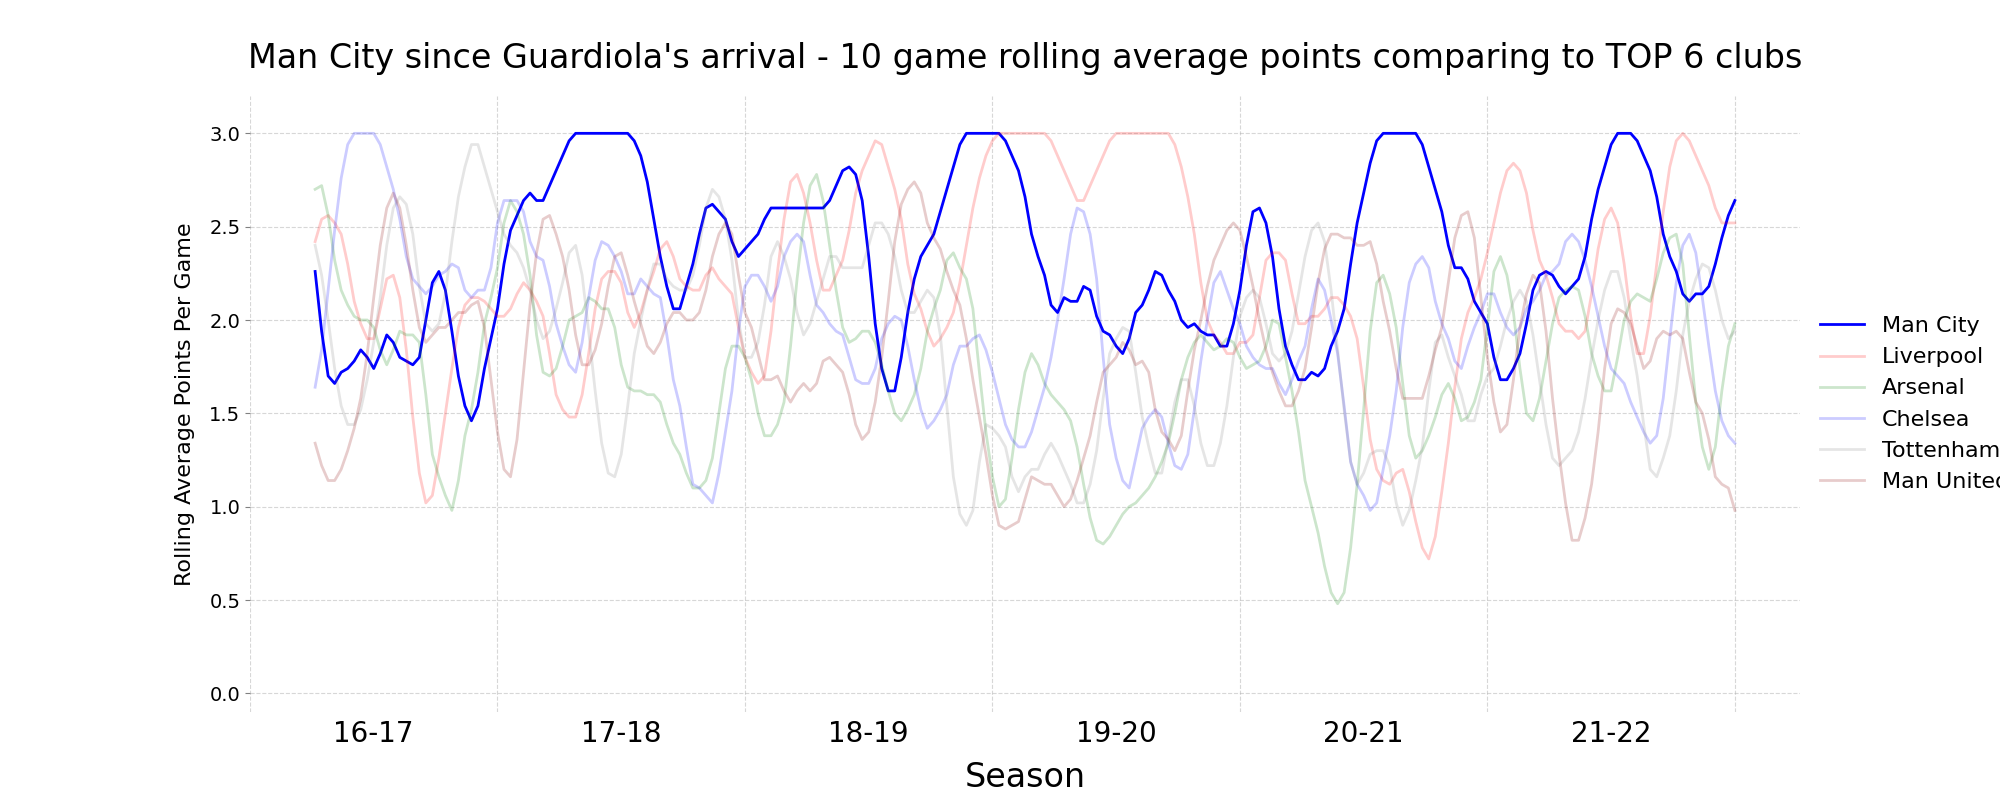 Man City since Guardiola's arrival - 10 game rolling average points comparing to TOP 6 clubs